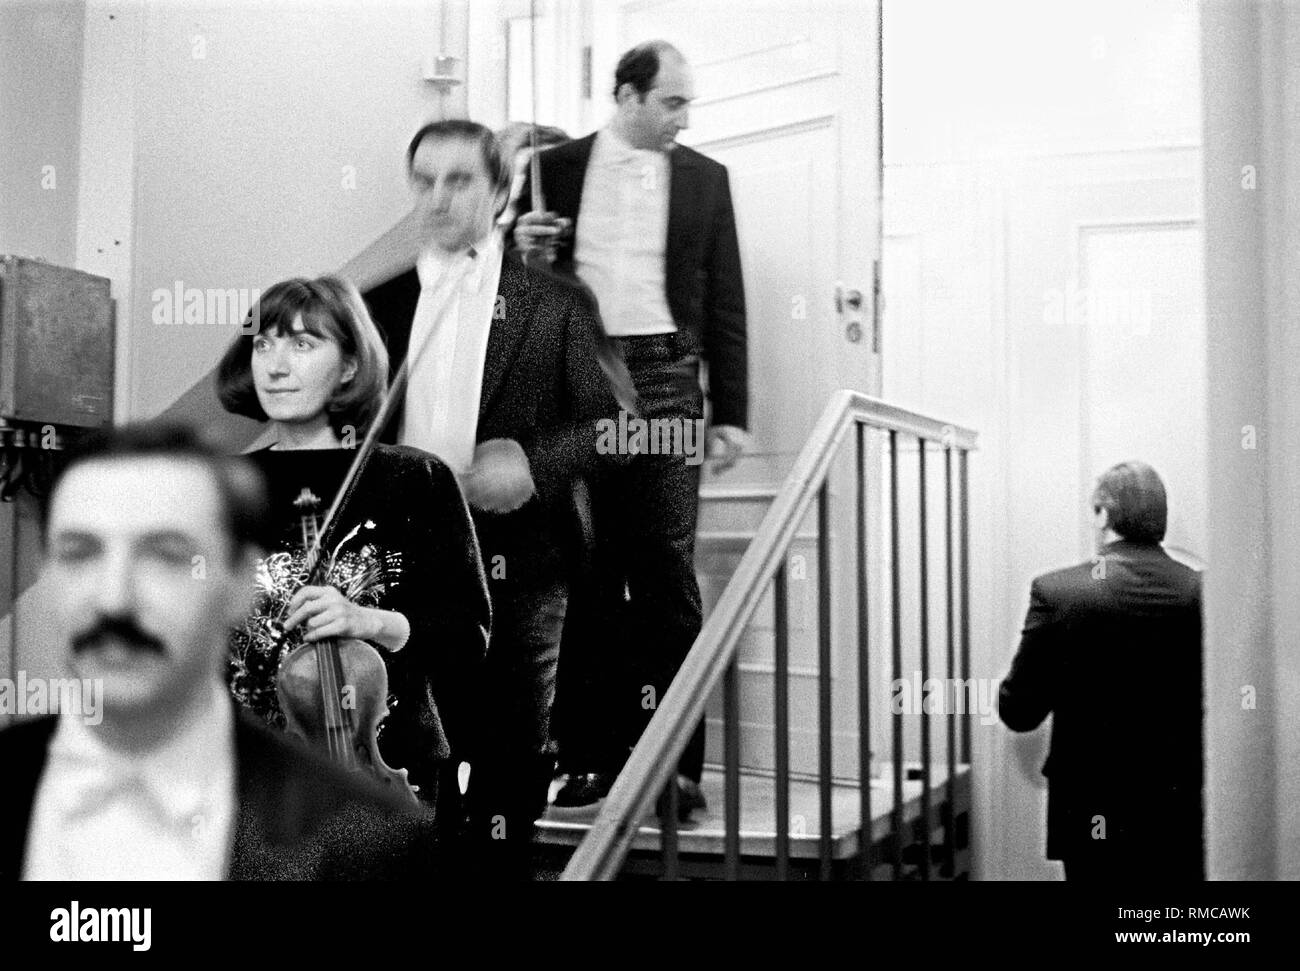 'Before the concert', (behind the stage), Berliner Festtage (Festival Days Berlin) in the Schauspielhaus, Germany, Berlin-Mitte, 22.02.1989. Stock Photo